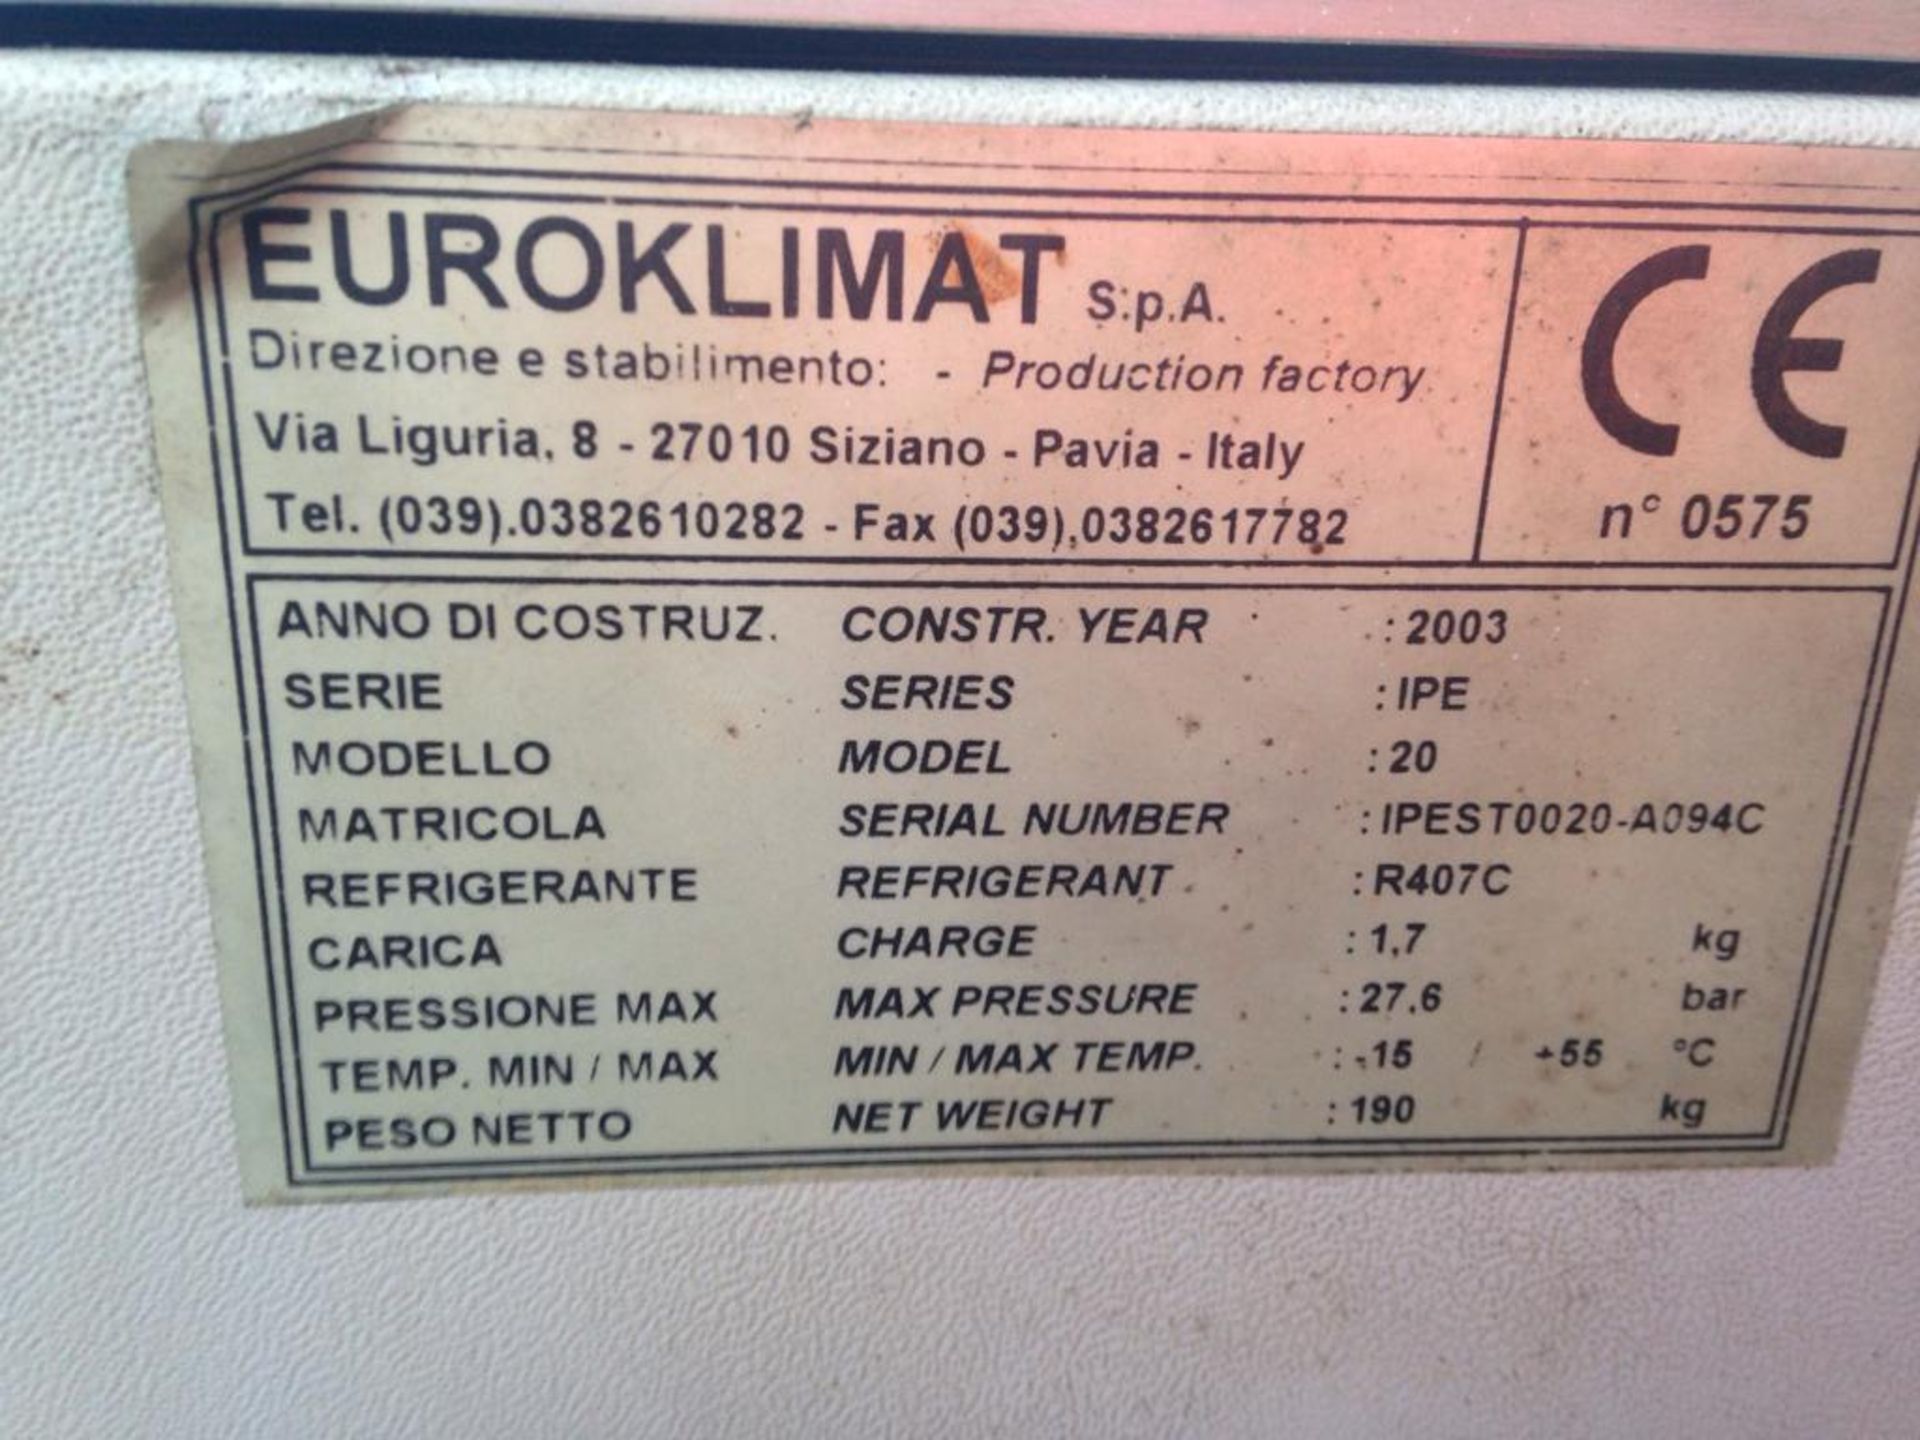 Euroklimat IPE 20 Chiller, serial no. IPEST0020-A094C, year of manufacture 2003 - Image 2 of 2